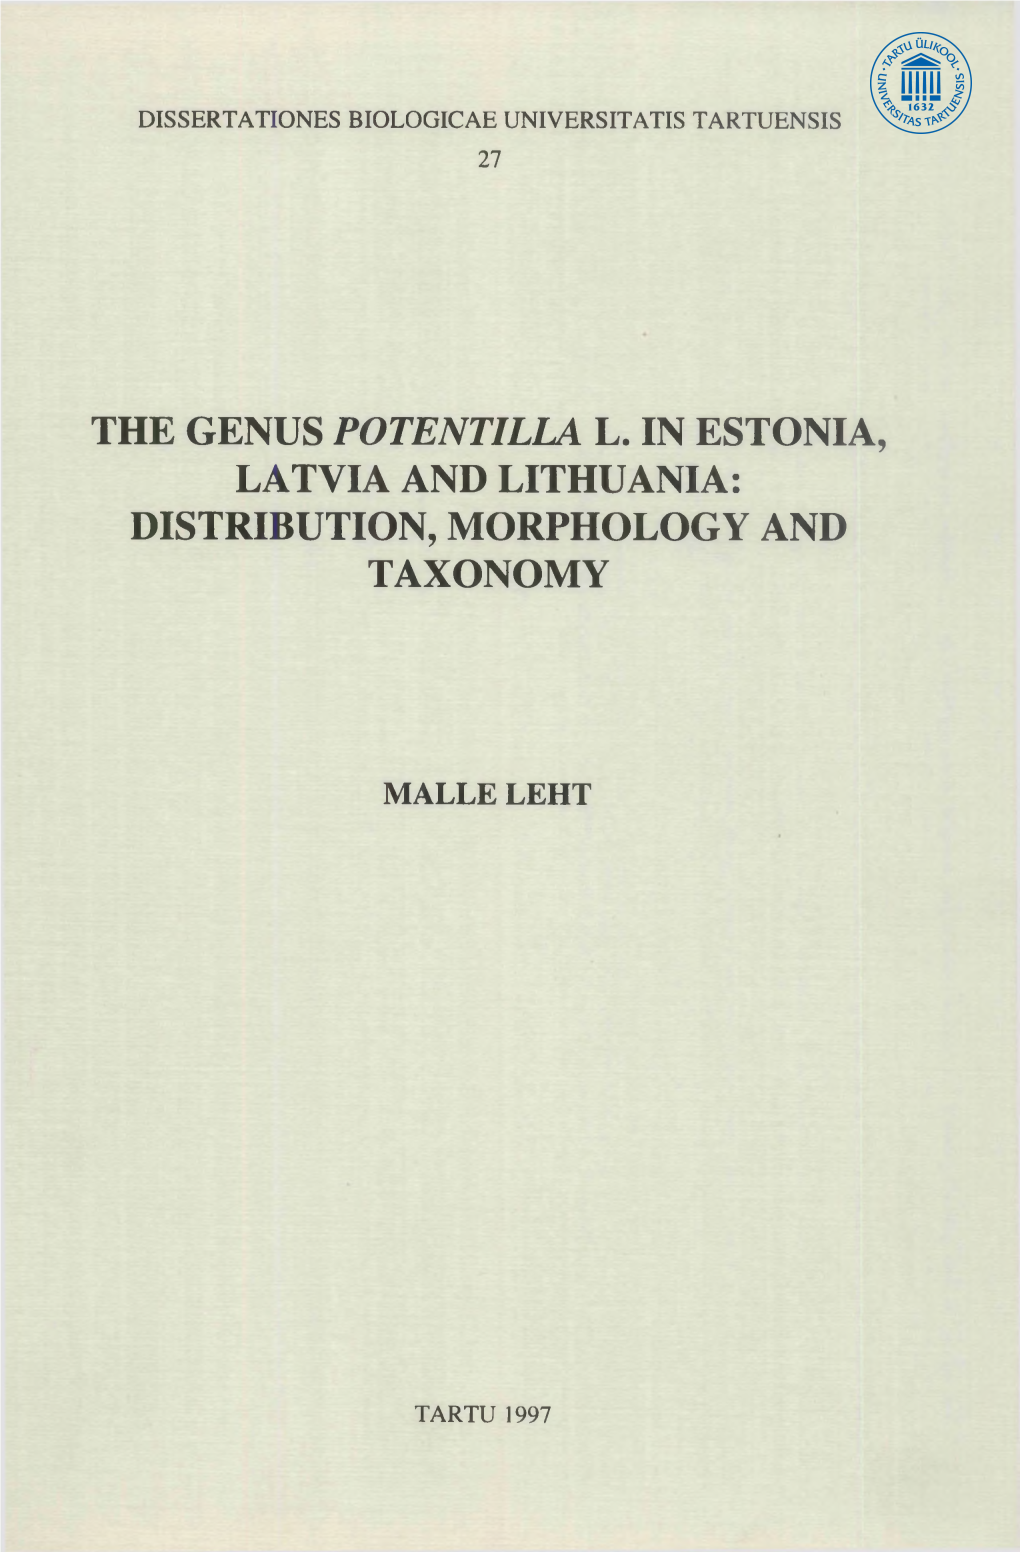 The Genus Potentilla L. in Estonia, Latvia and Lithuania: Distribution, Morphology and Taxonomy